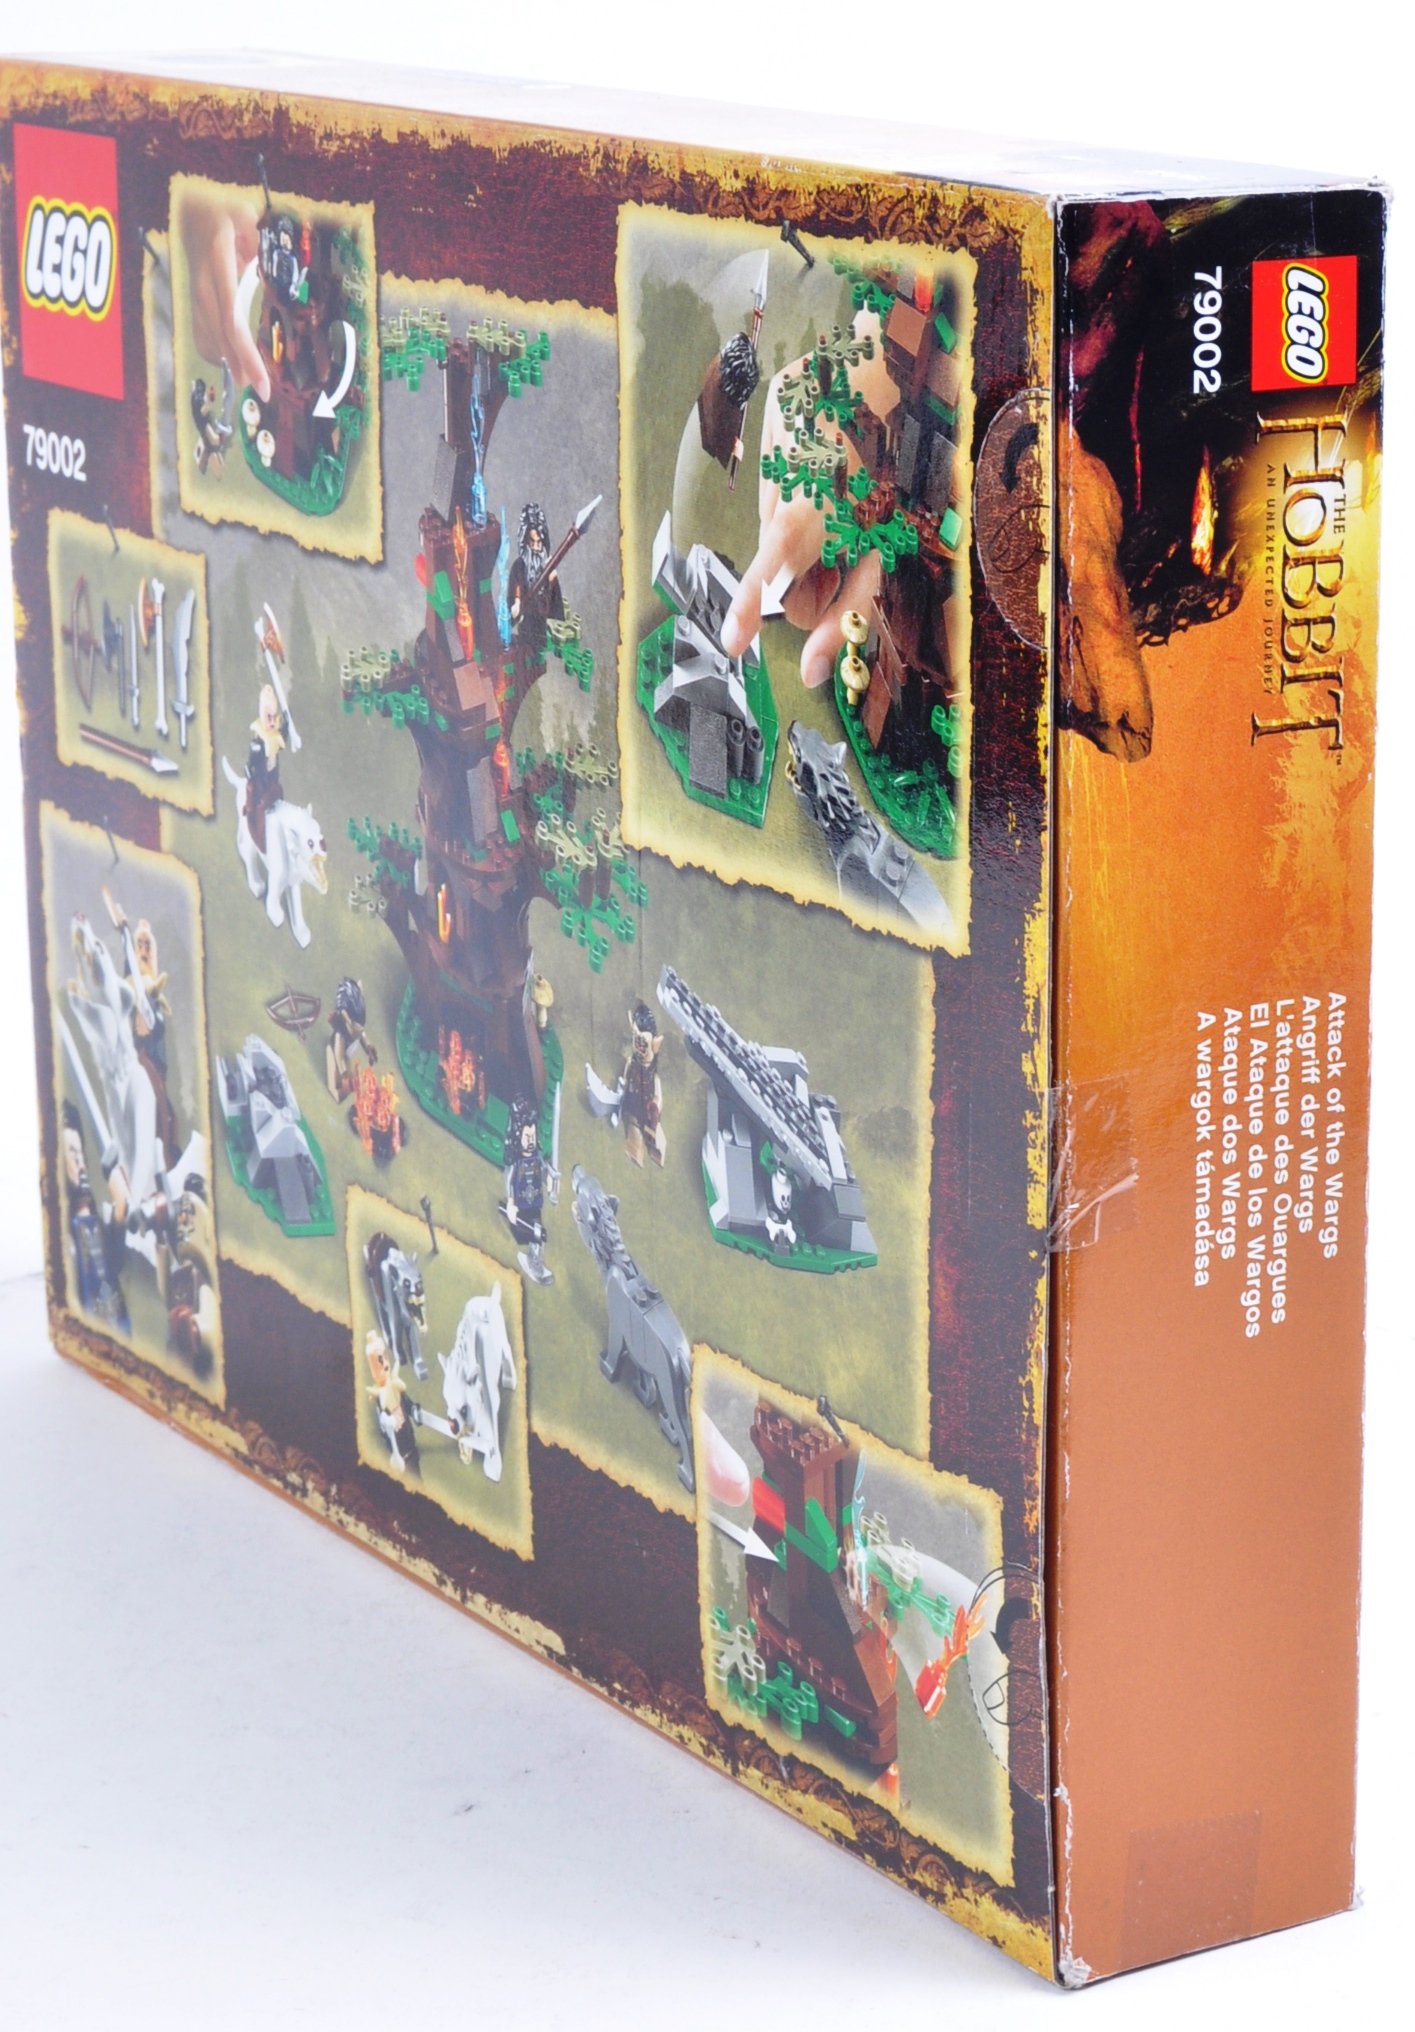 LEGO SET - THE HOBBIT - 79002 - ATTACK OF THE WARGS - Image 3 of 4